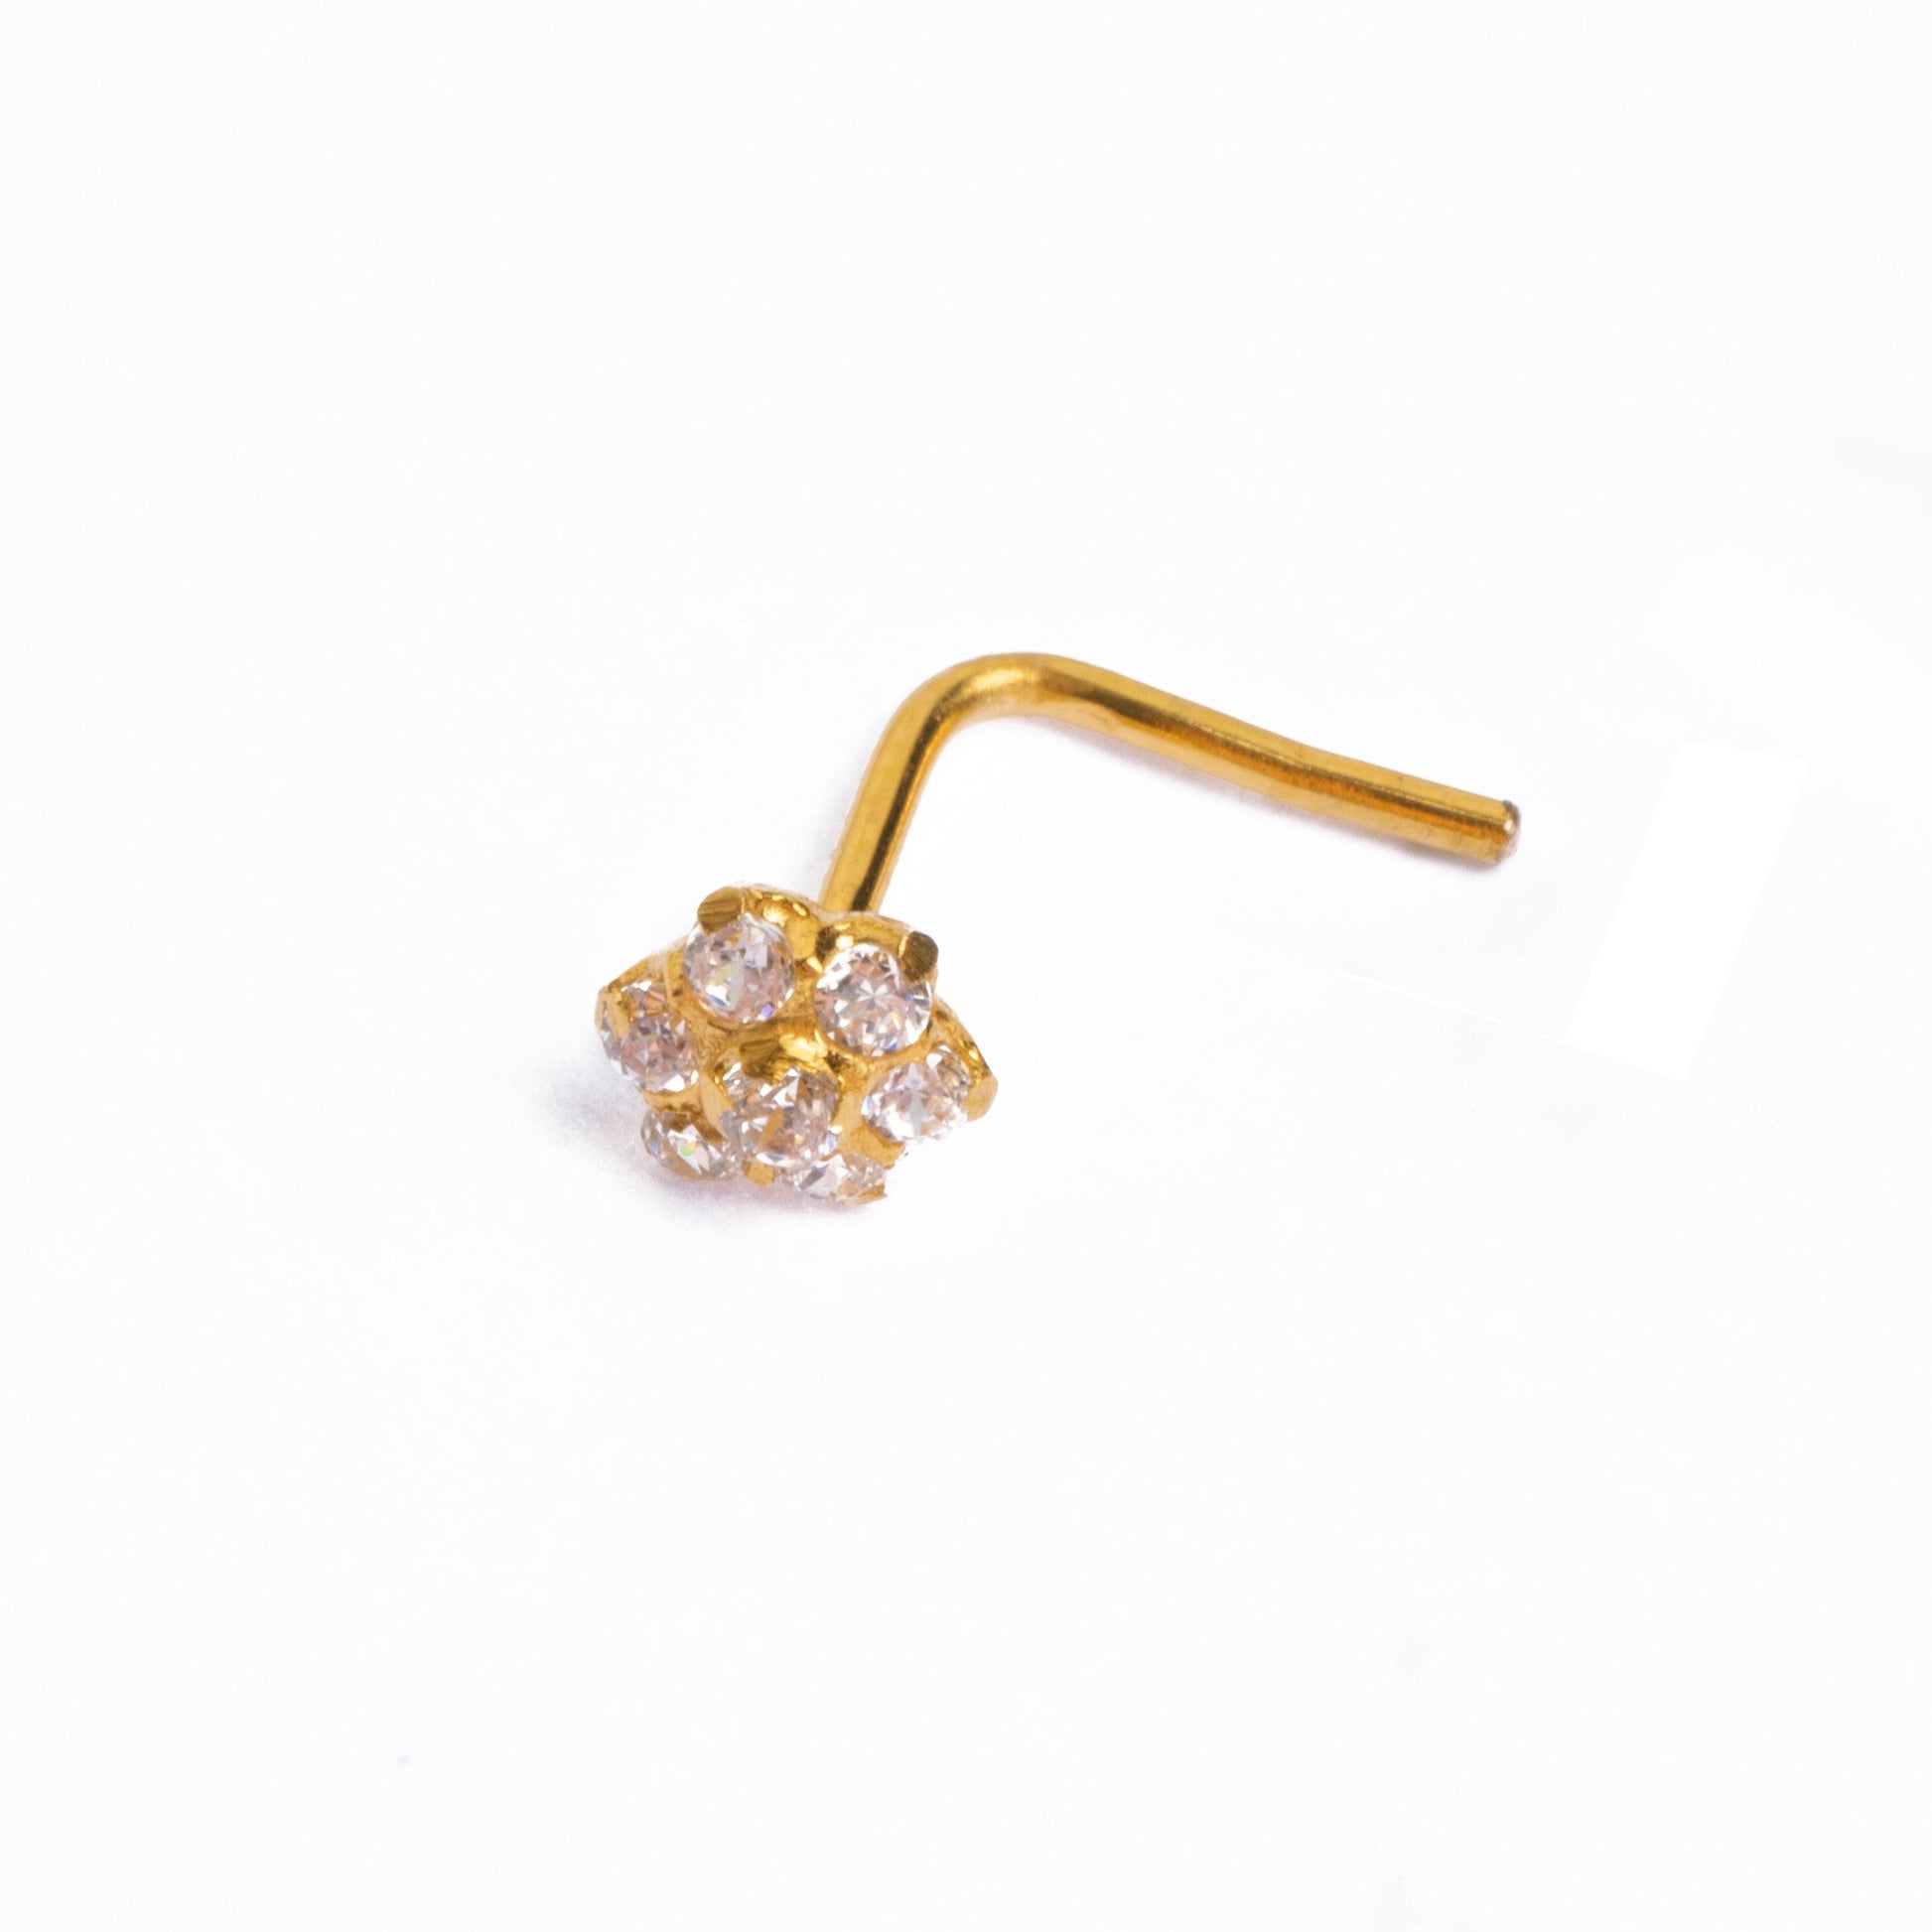 18ct Yellow Gold L-Shaped Nose Stud set with Seven Cubic Zirconias (4mm - 5mm) NIP-5-040 - Minar Jewellers